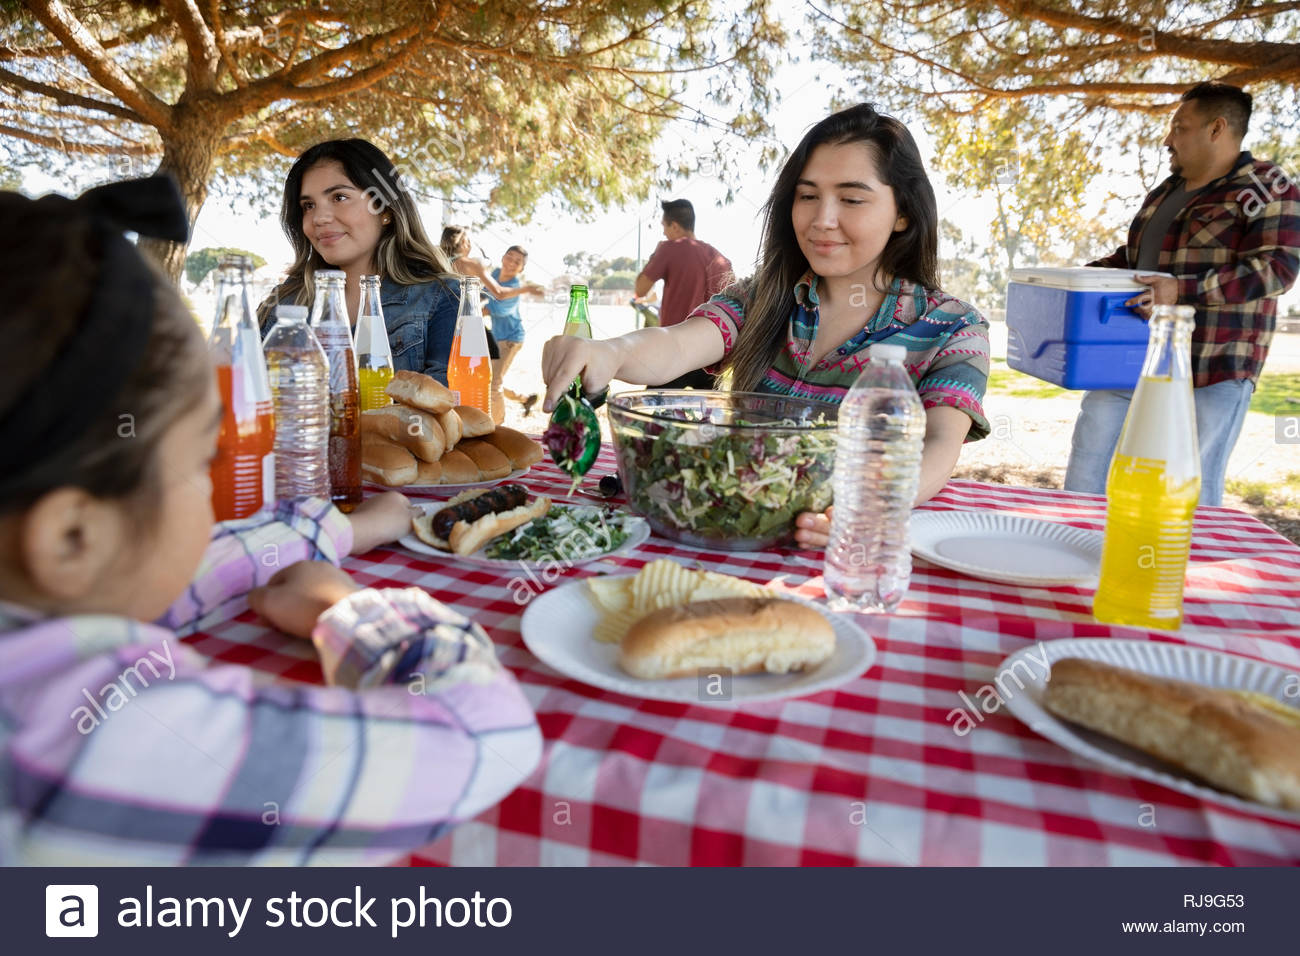 Latinx family enjoying barbecue in park Banque D'Images